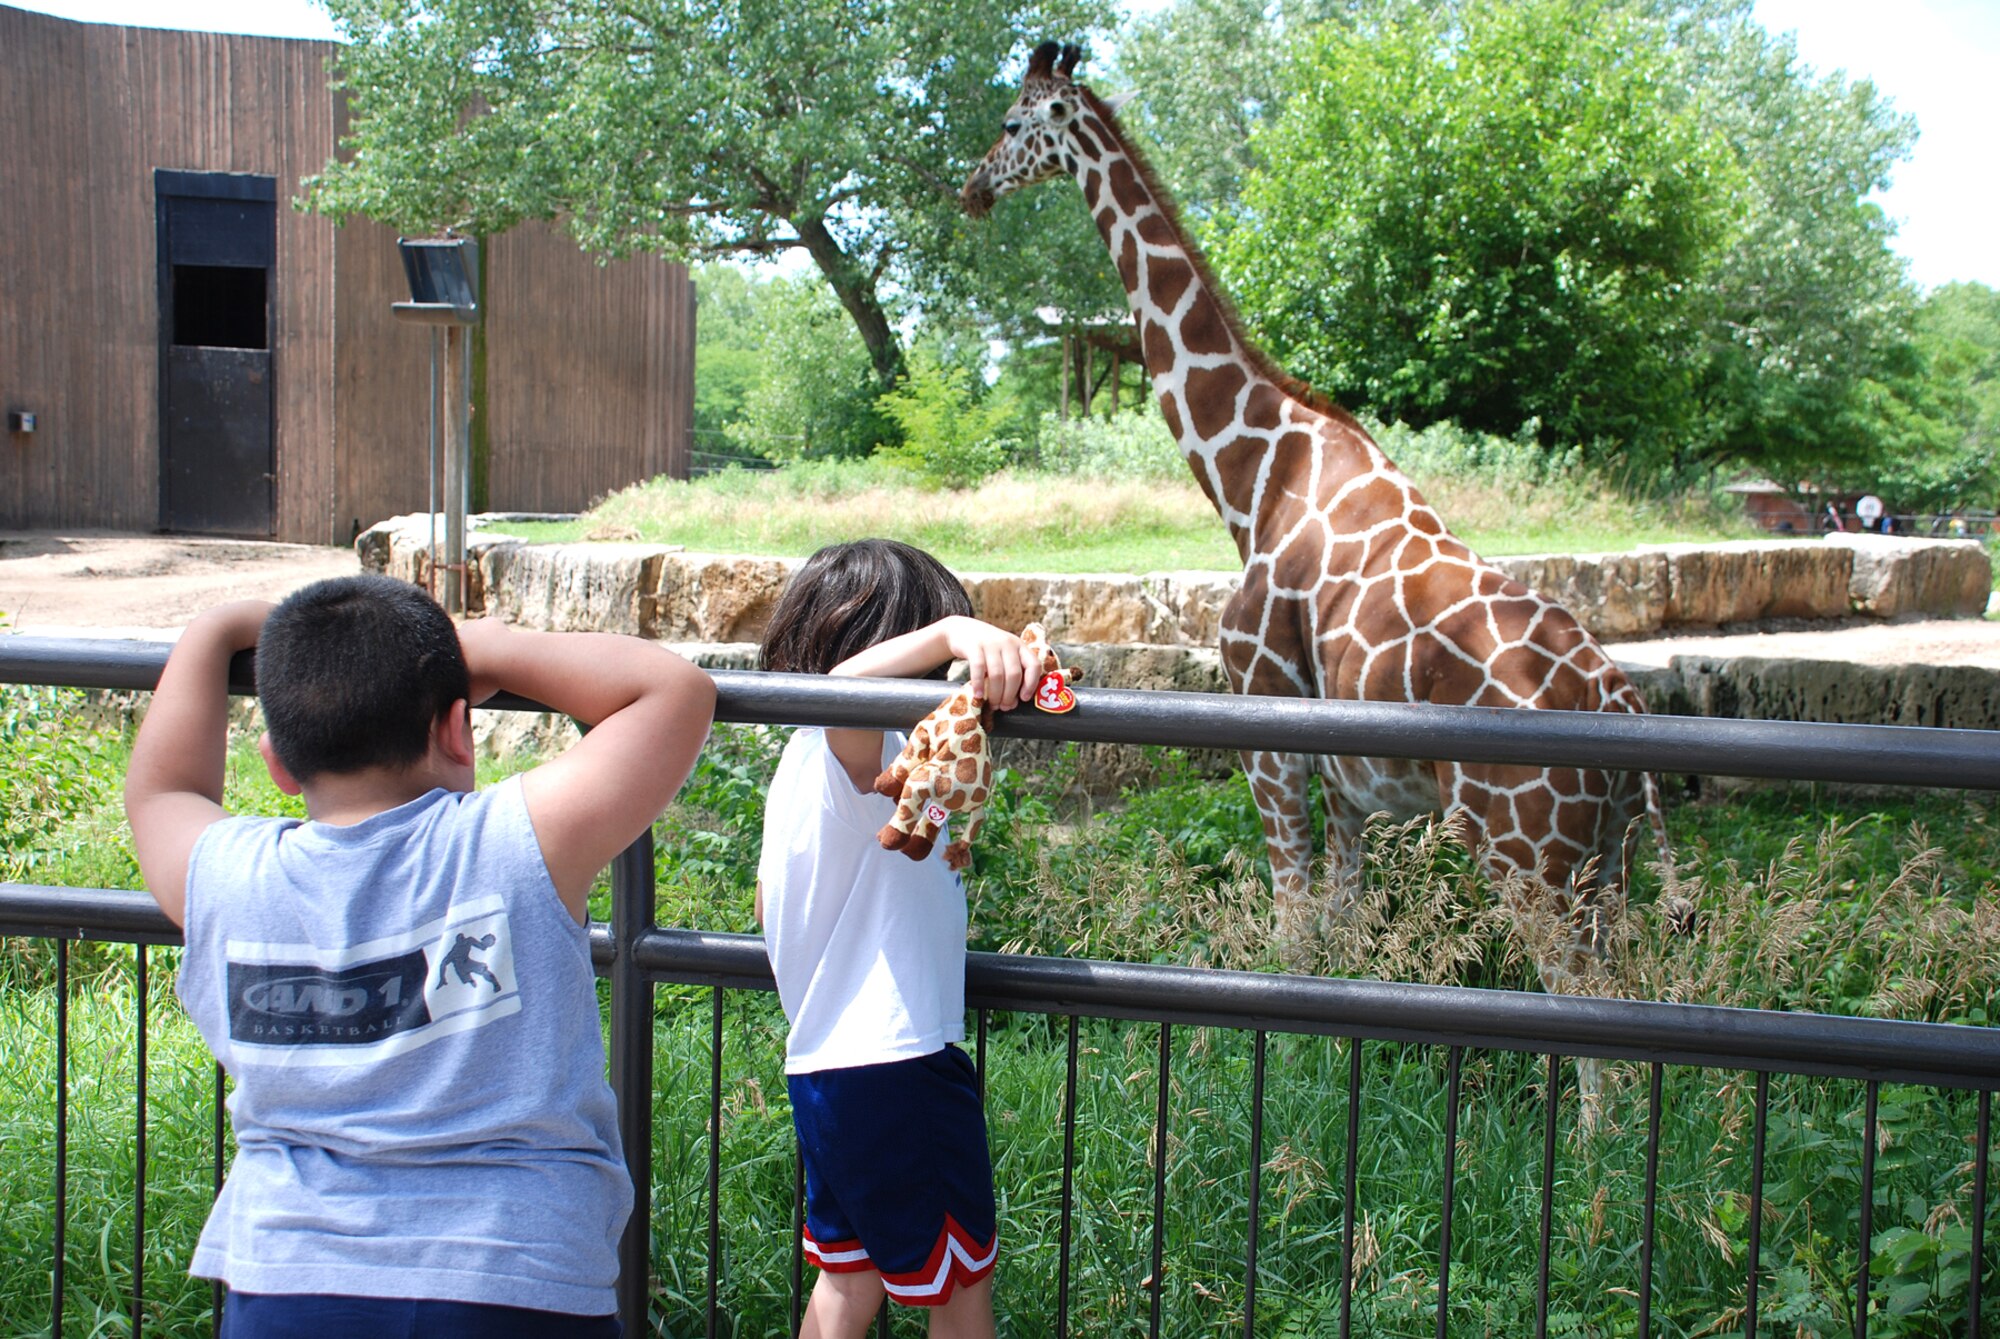 Abbiel and Abdiel Cruz, sons of deployed Staff Sgt. Julio Cruz, 22nd Aircraft Maintenance Squadron, watch a giraffe through the gate at the zoo June 23. Spouses and children of deployed McConnell members gathered together with the Hearts Apart program and had the opportunity to send messages through video communication to their loved ones. (Photo by Airman 1st Class Jessica Lockoski)